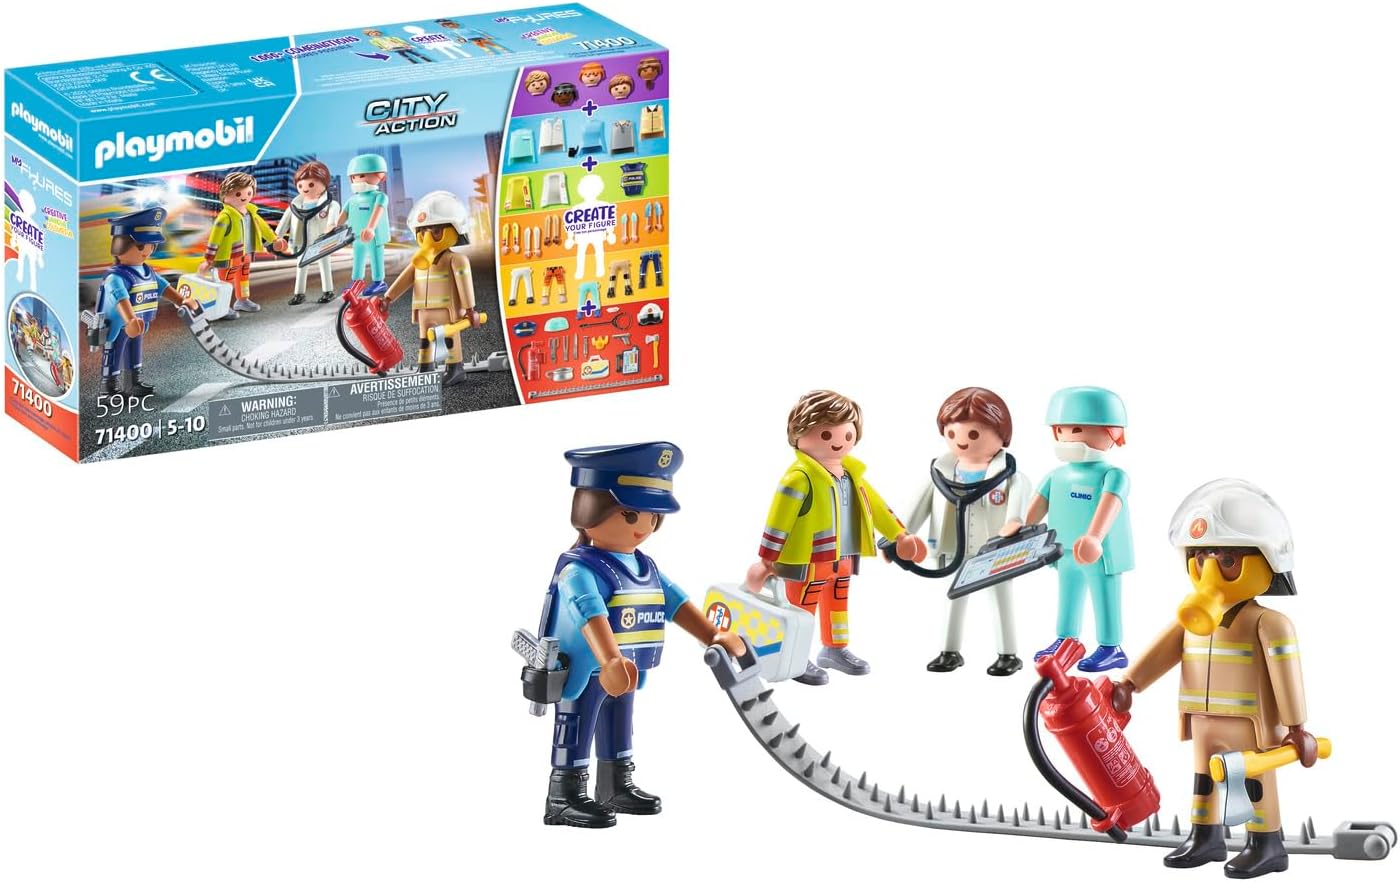 PLAYMOBIL My Figures 71400 Rescue, City Action, 5 Toy Figures with Over 1000 Combination Options, with Accessories such as Fire Extinguisher, First Aid Kit and Gun, Toy for Children from 5 Years